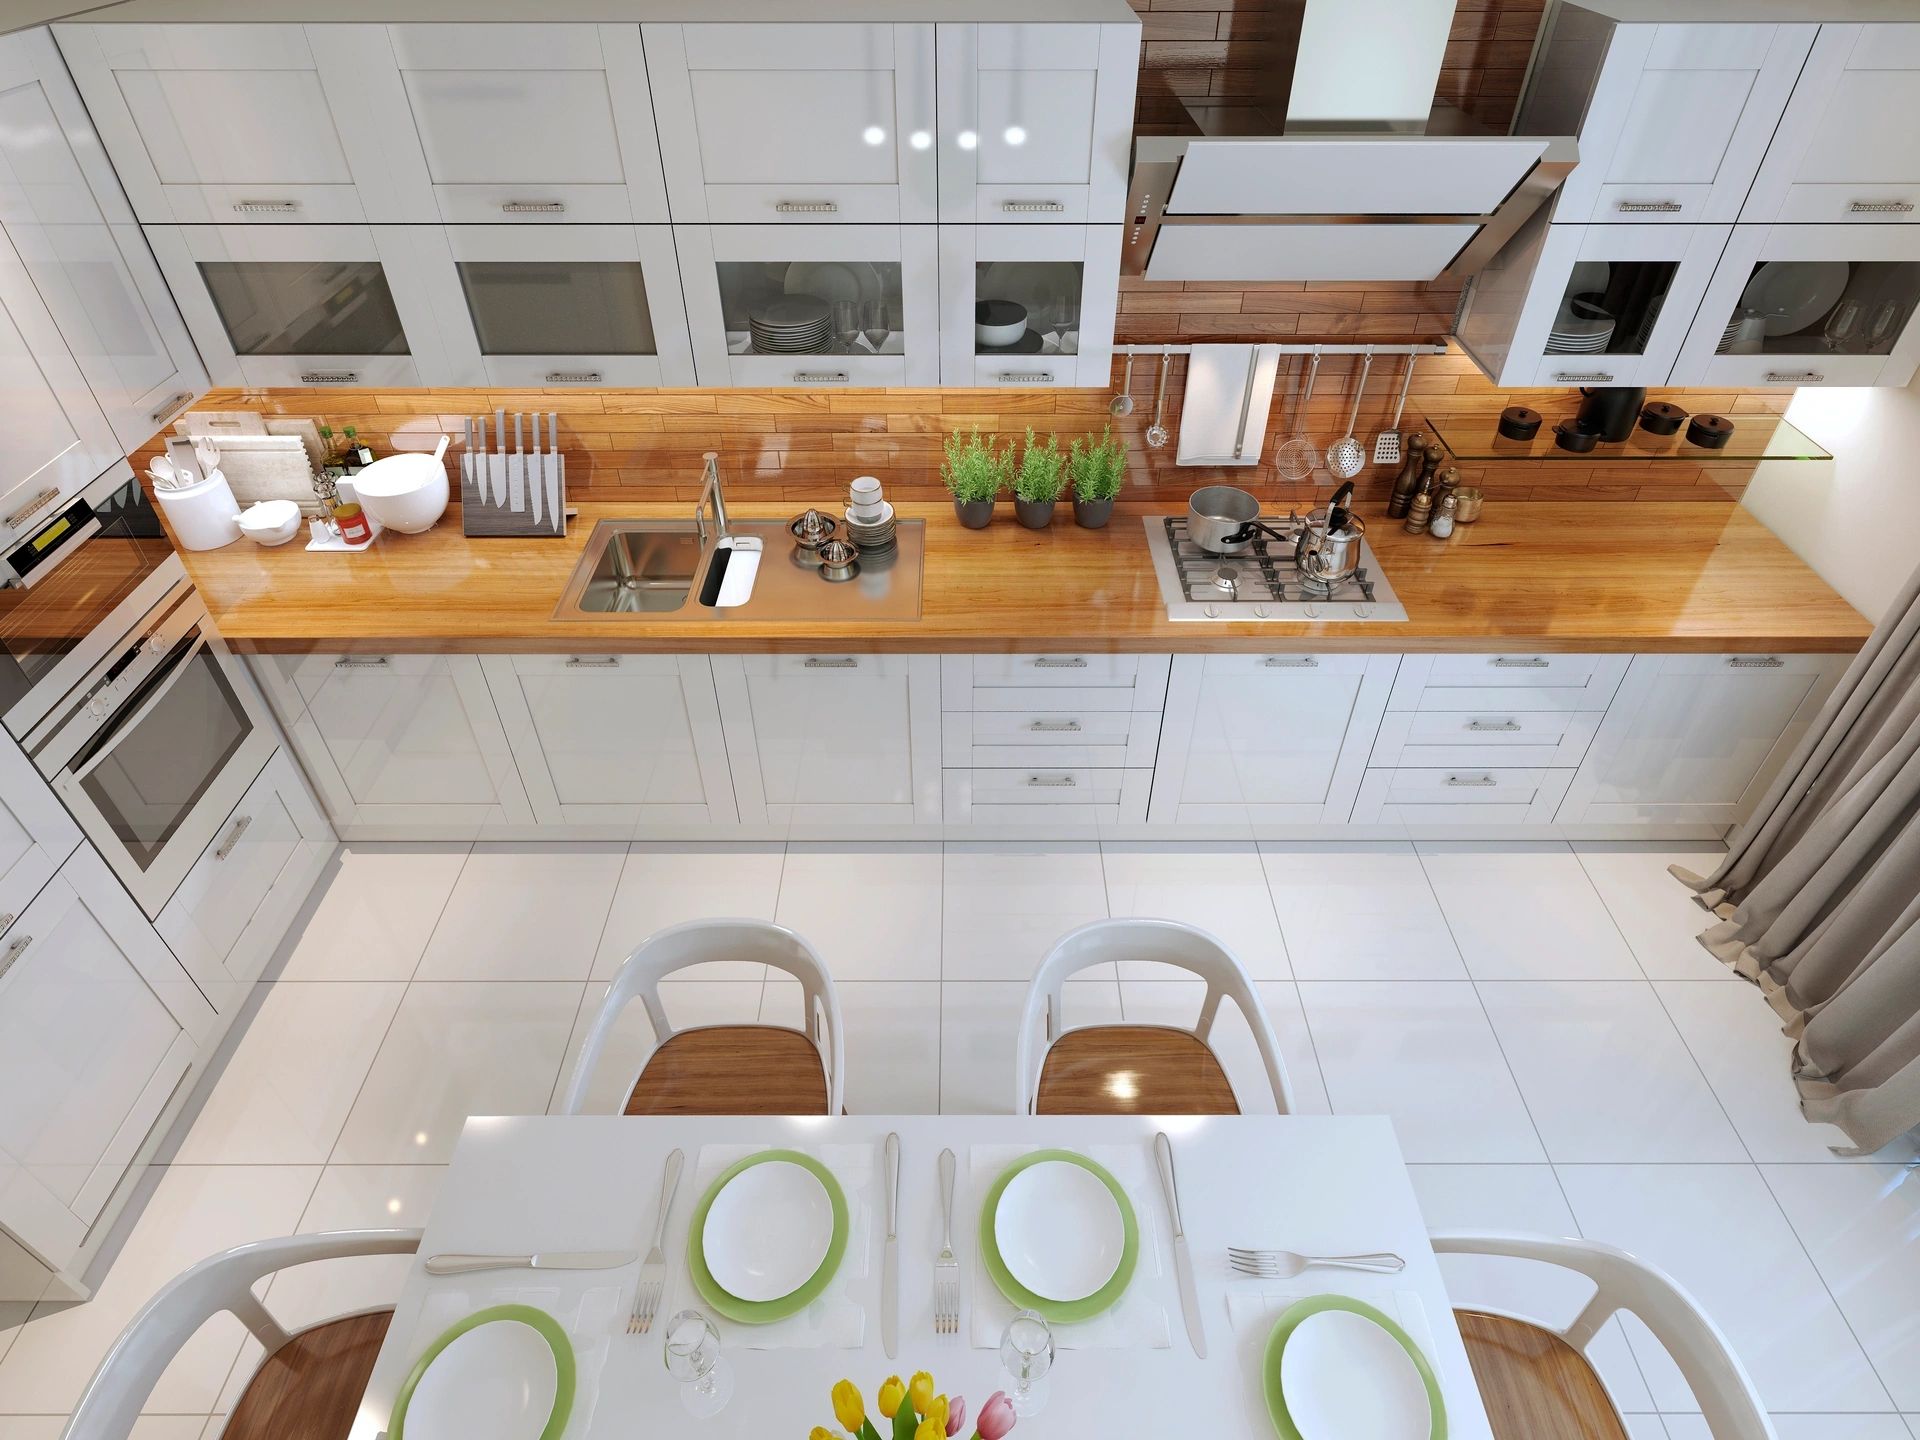 Todays Designer Kitchens qtq80-LeTrOh Top Tips for Creating Kid Friendly Kitchens 